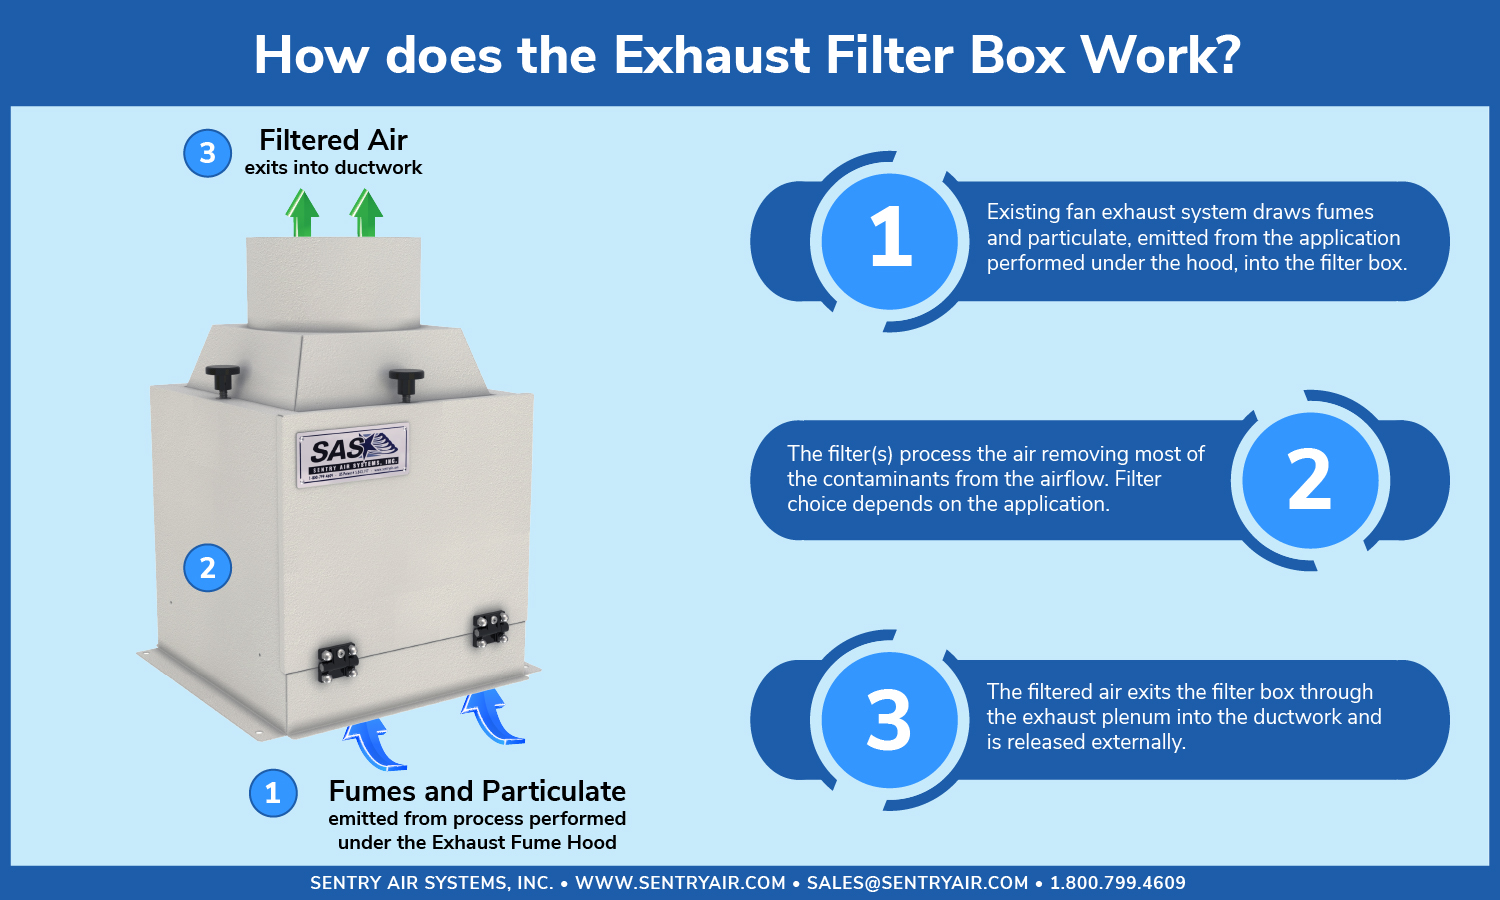 How Does an Exhaust Filter Box work